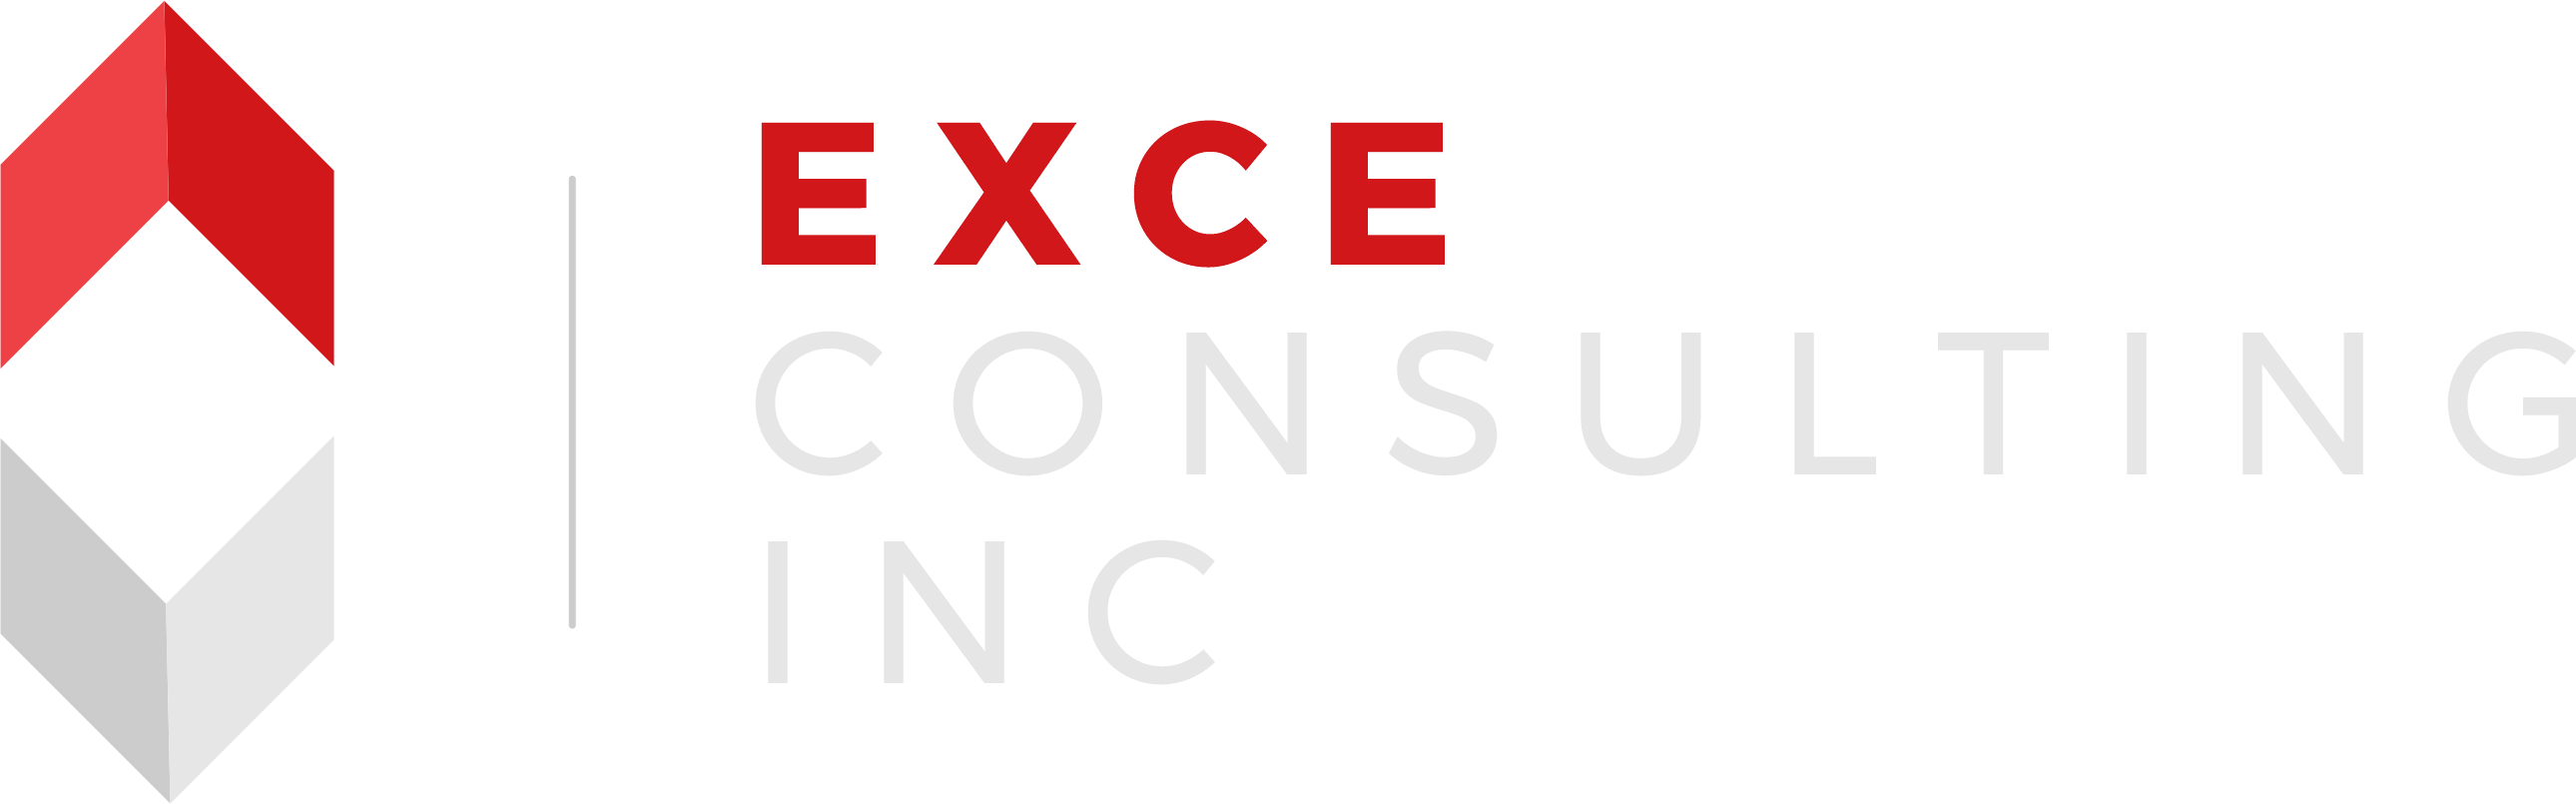 Exce Consulting Inc